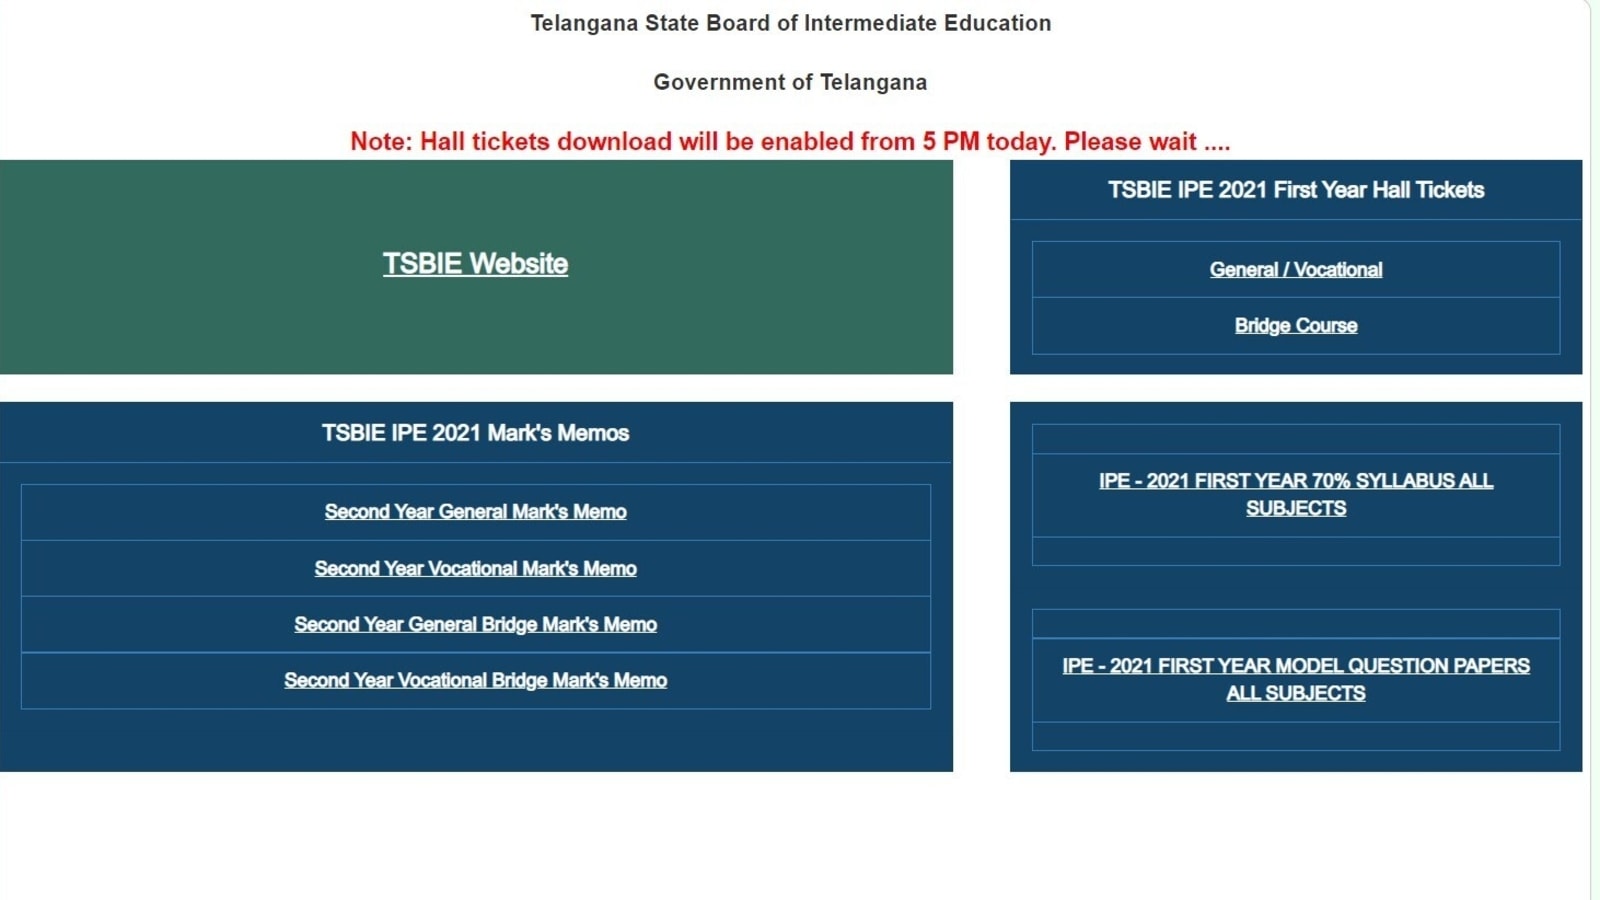 TS Inter Hall Ticket to be released today by 5 pm at tsbie.cgg.gov.in